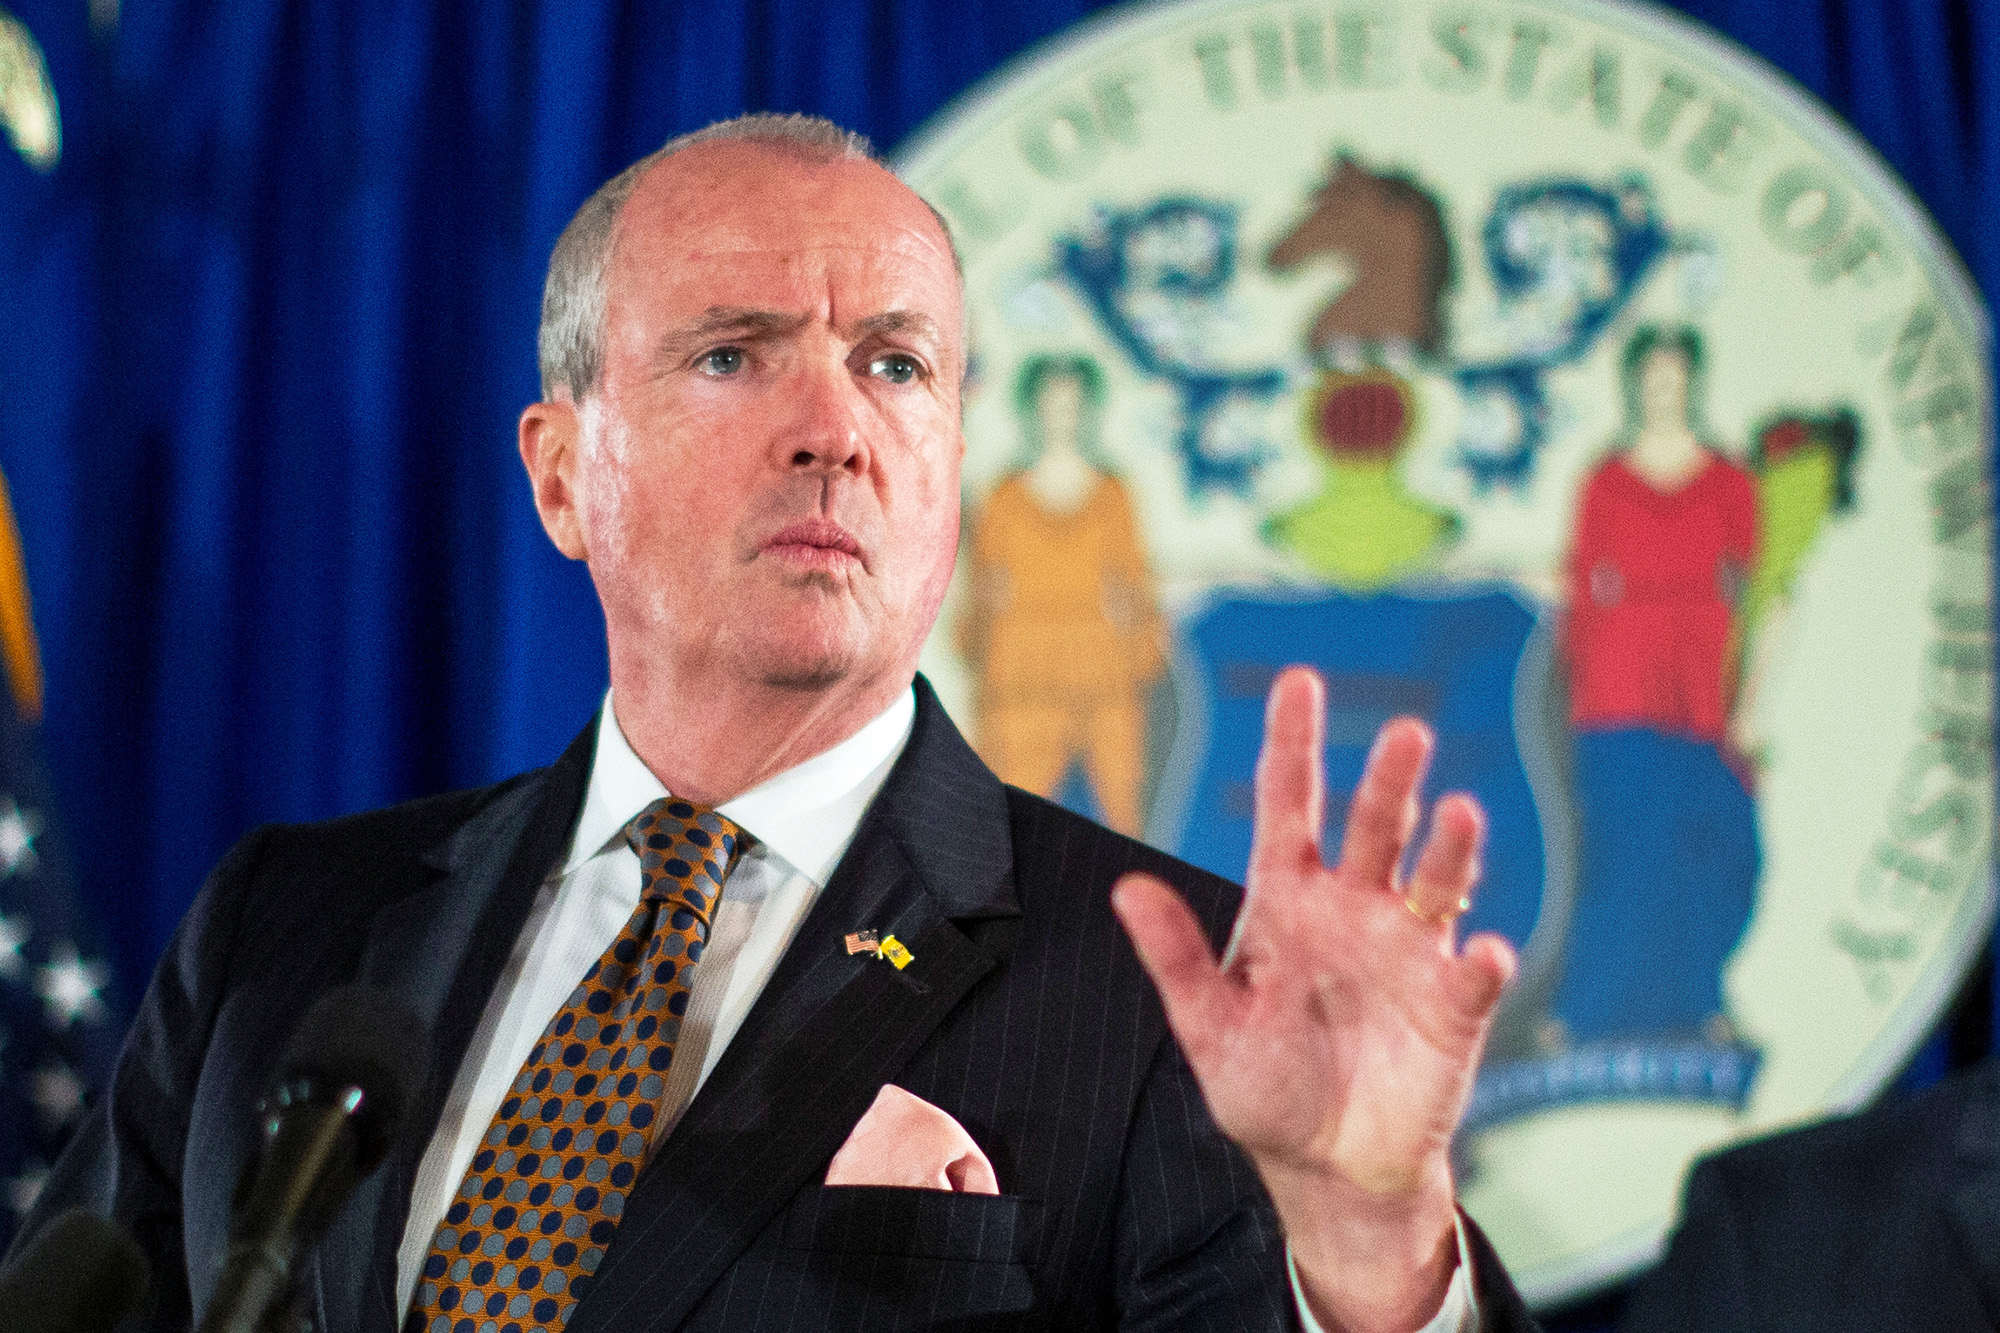 PHOTO: New Jersey Governor Phil Murphy speaks during a news conference in Trenton, N.J., Sept. 12, 2019.